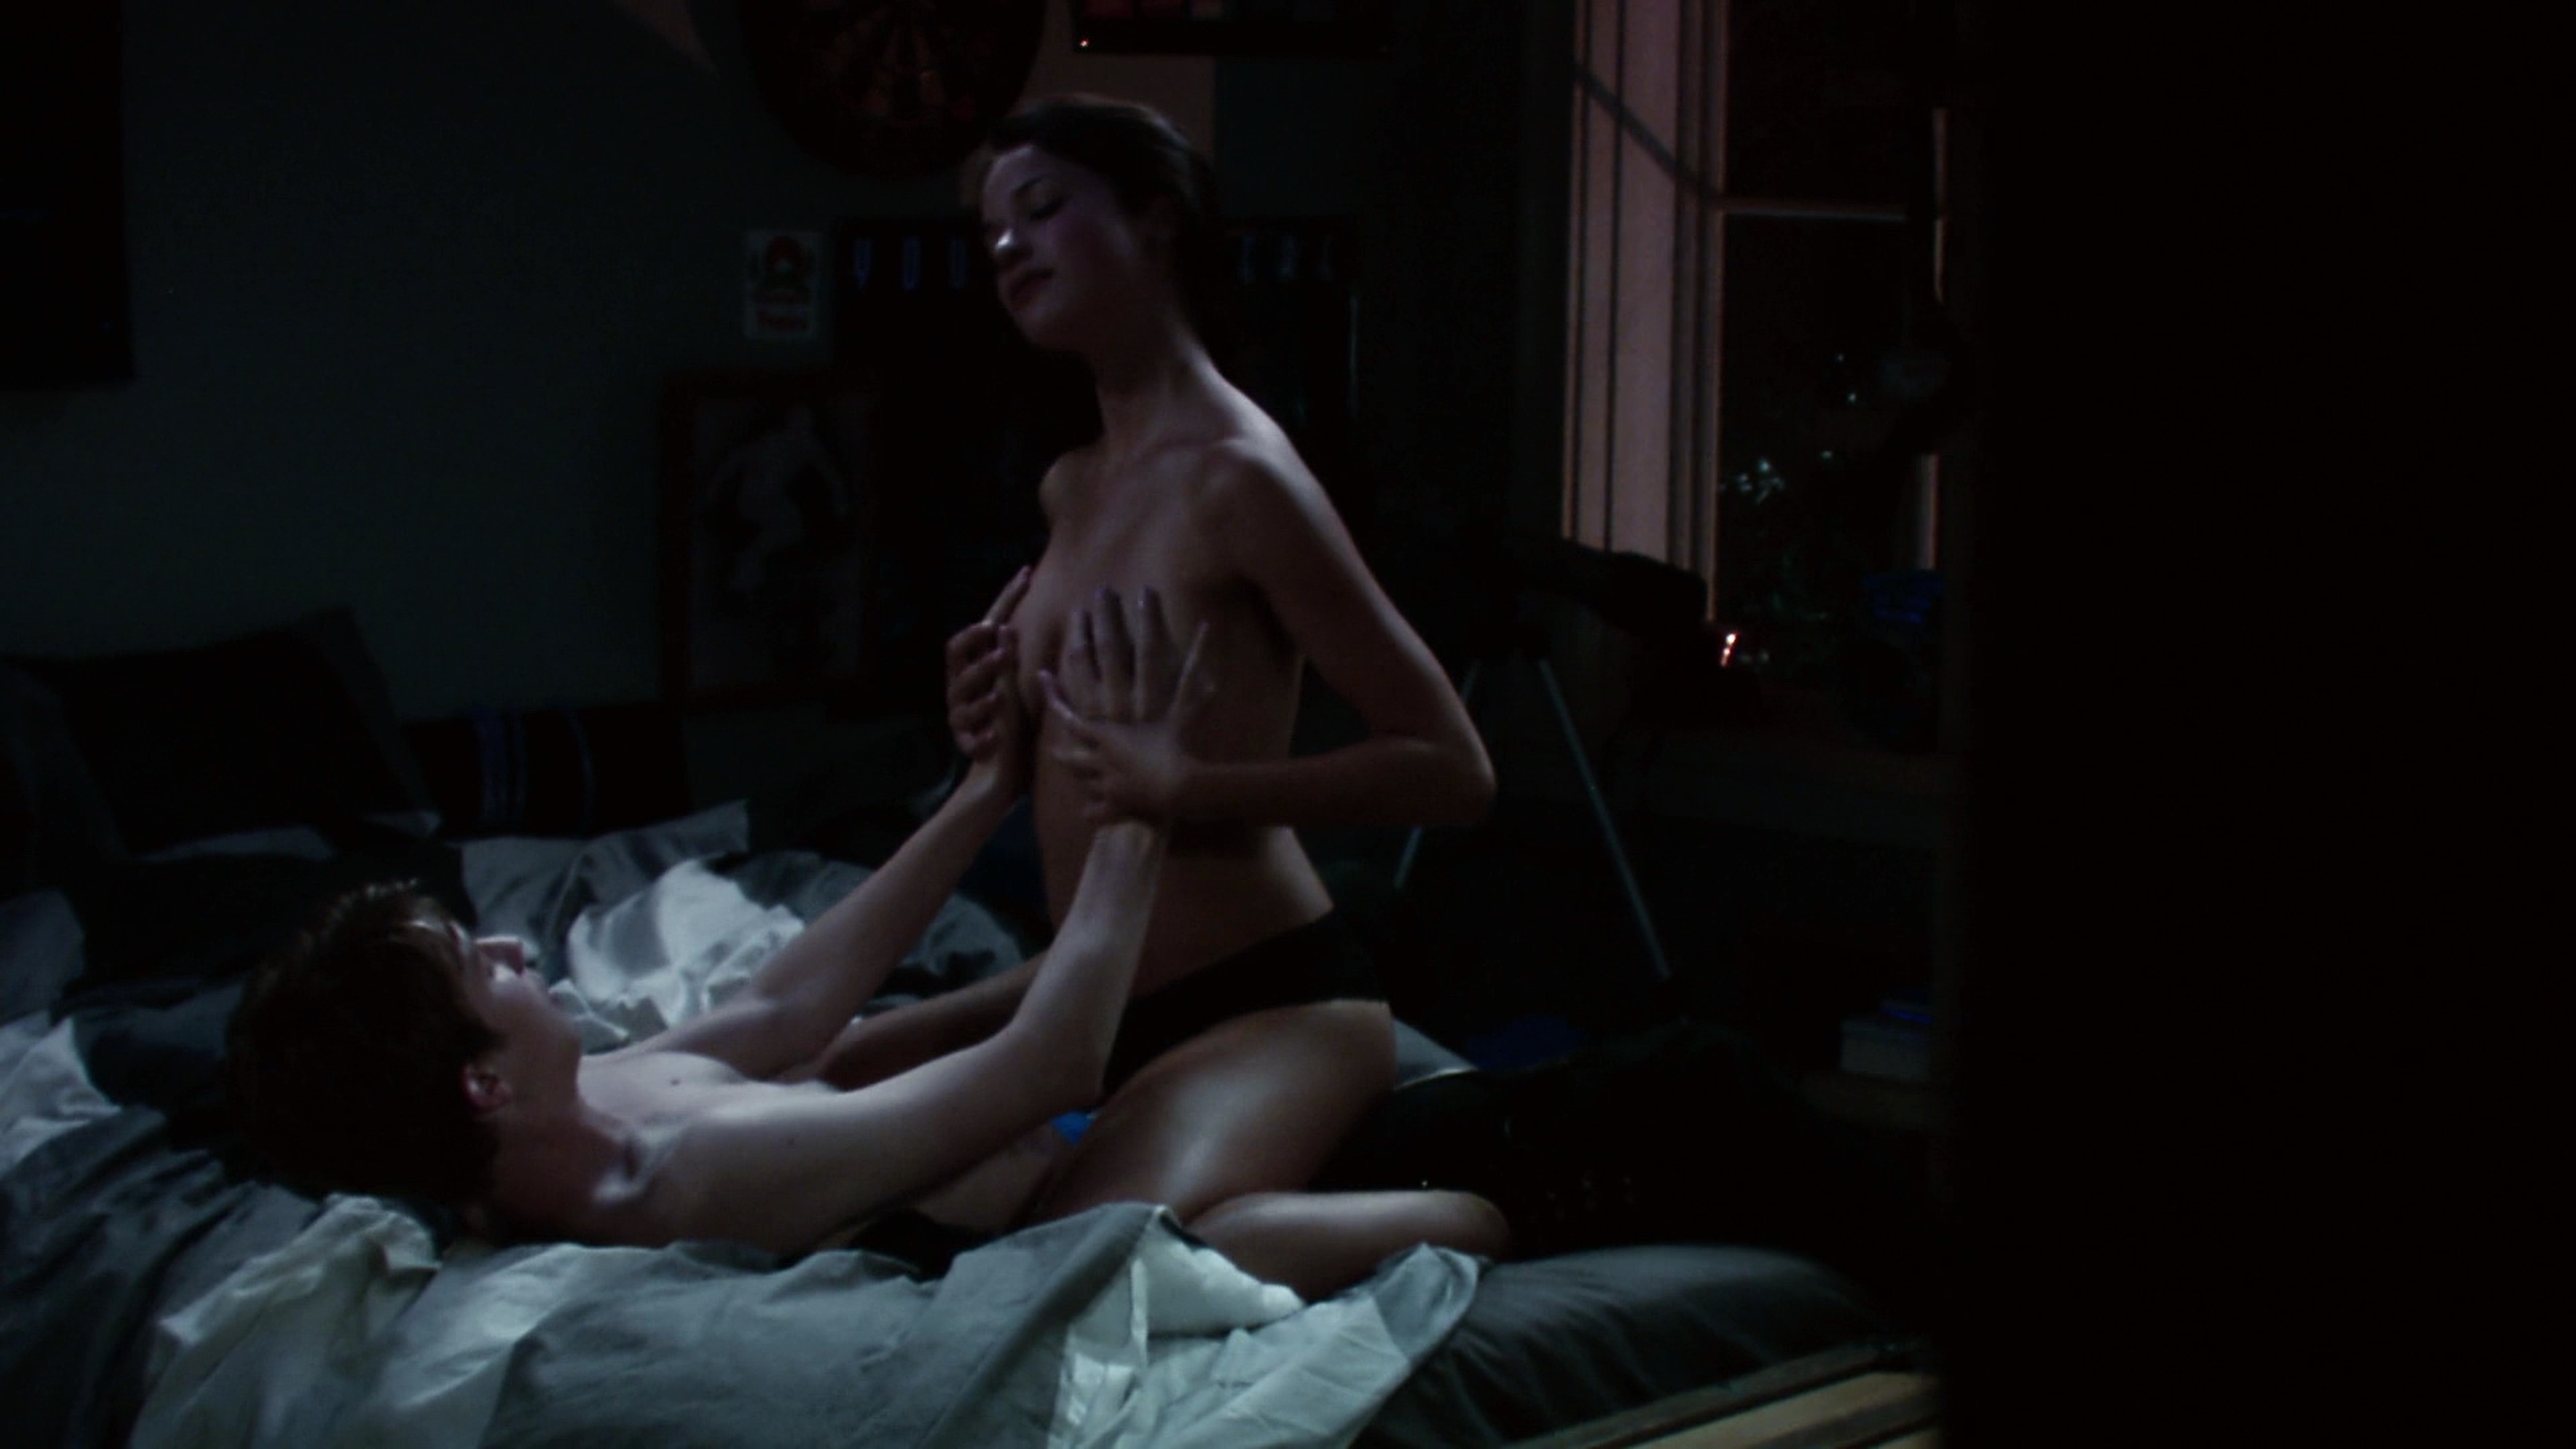 and nude video celebs alexis knapp nude project x, naked alexis knapp in pr...